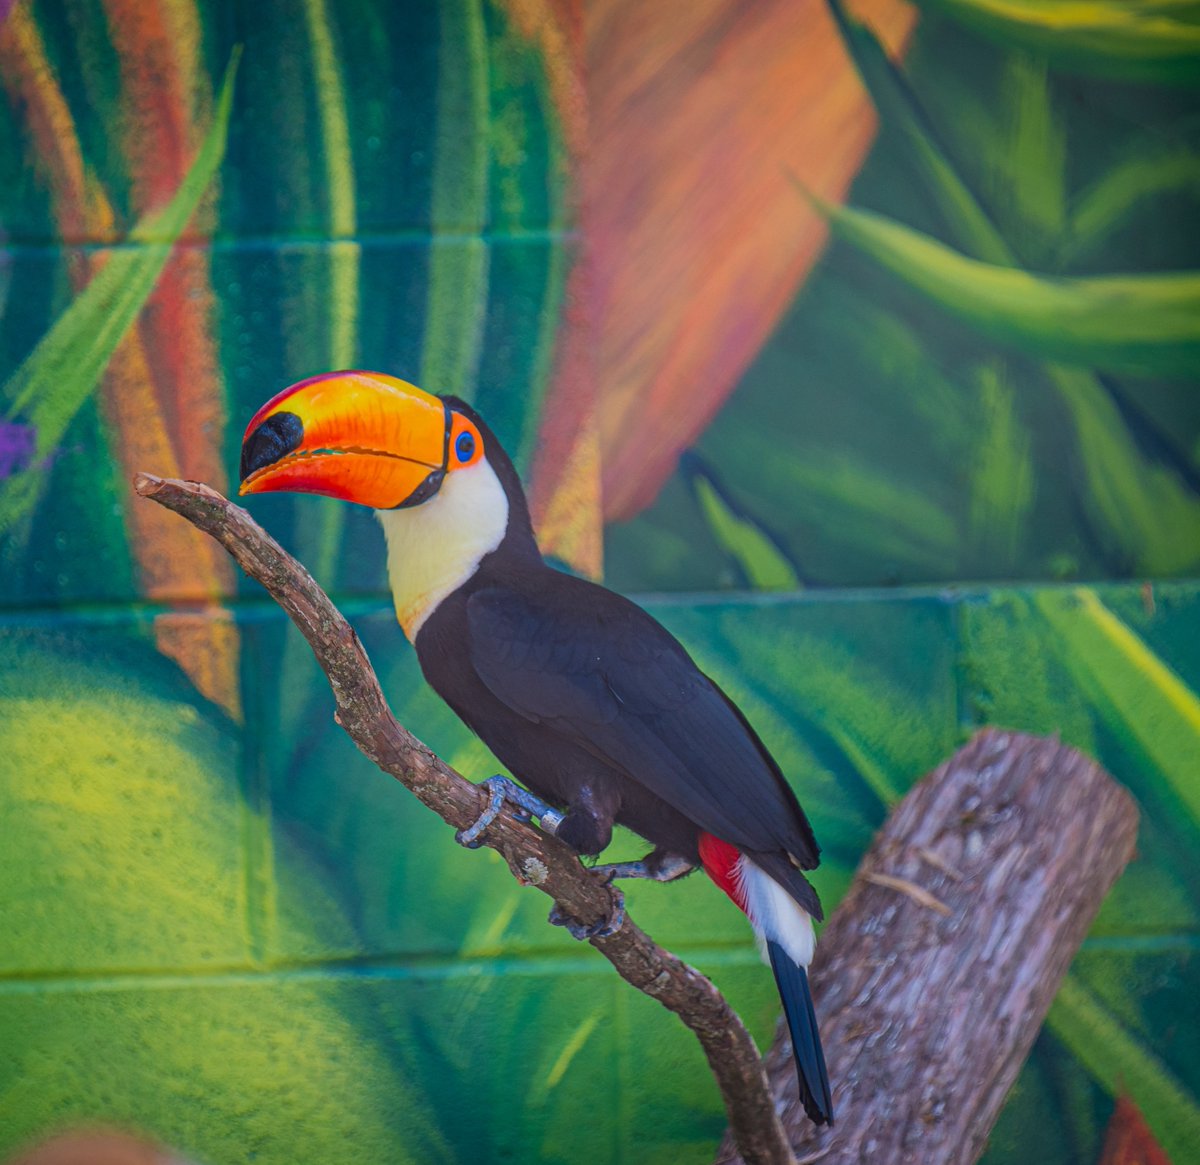 Happy 8th birthday to Lucy, our female toucan! Lucy made history last year as the first of her species to join the Louisville Zoo. Visit Lucy in the Americas zone daily from 10 a.m. – 5 p.m., exit by 6 p.m. 'Toucan' retweet to say happy birthday to Lucy!